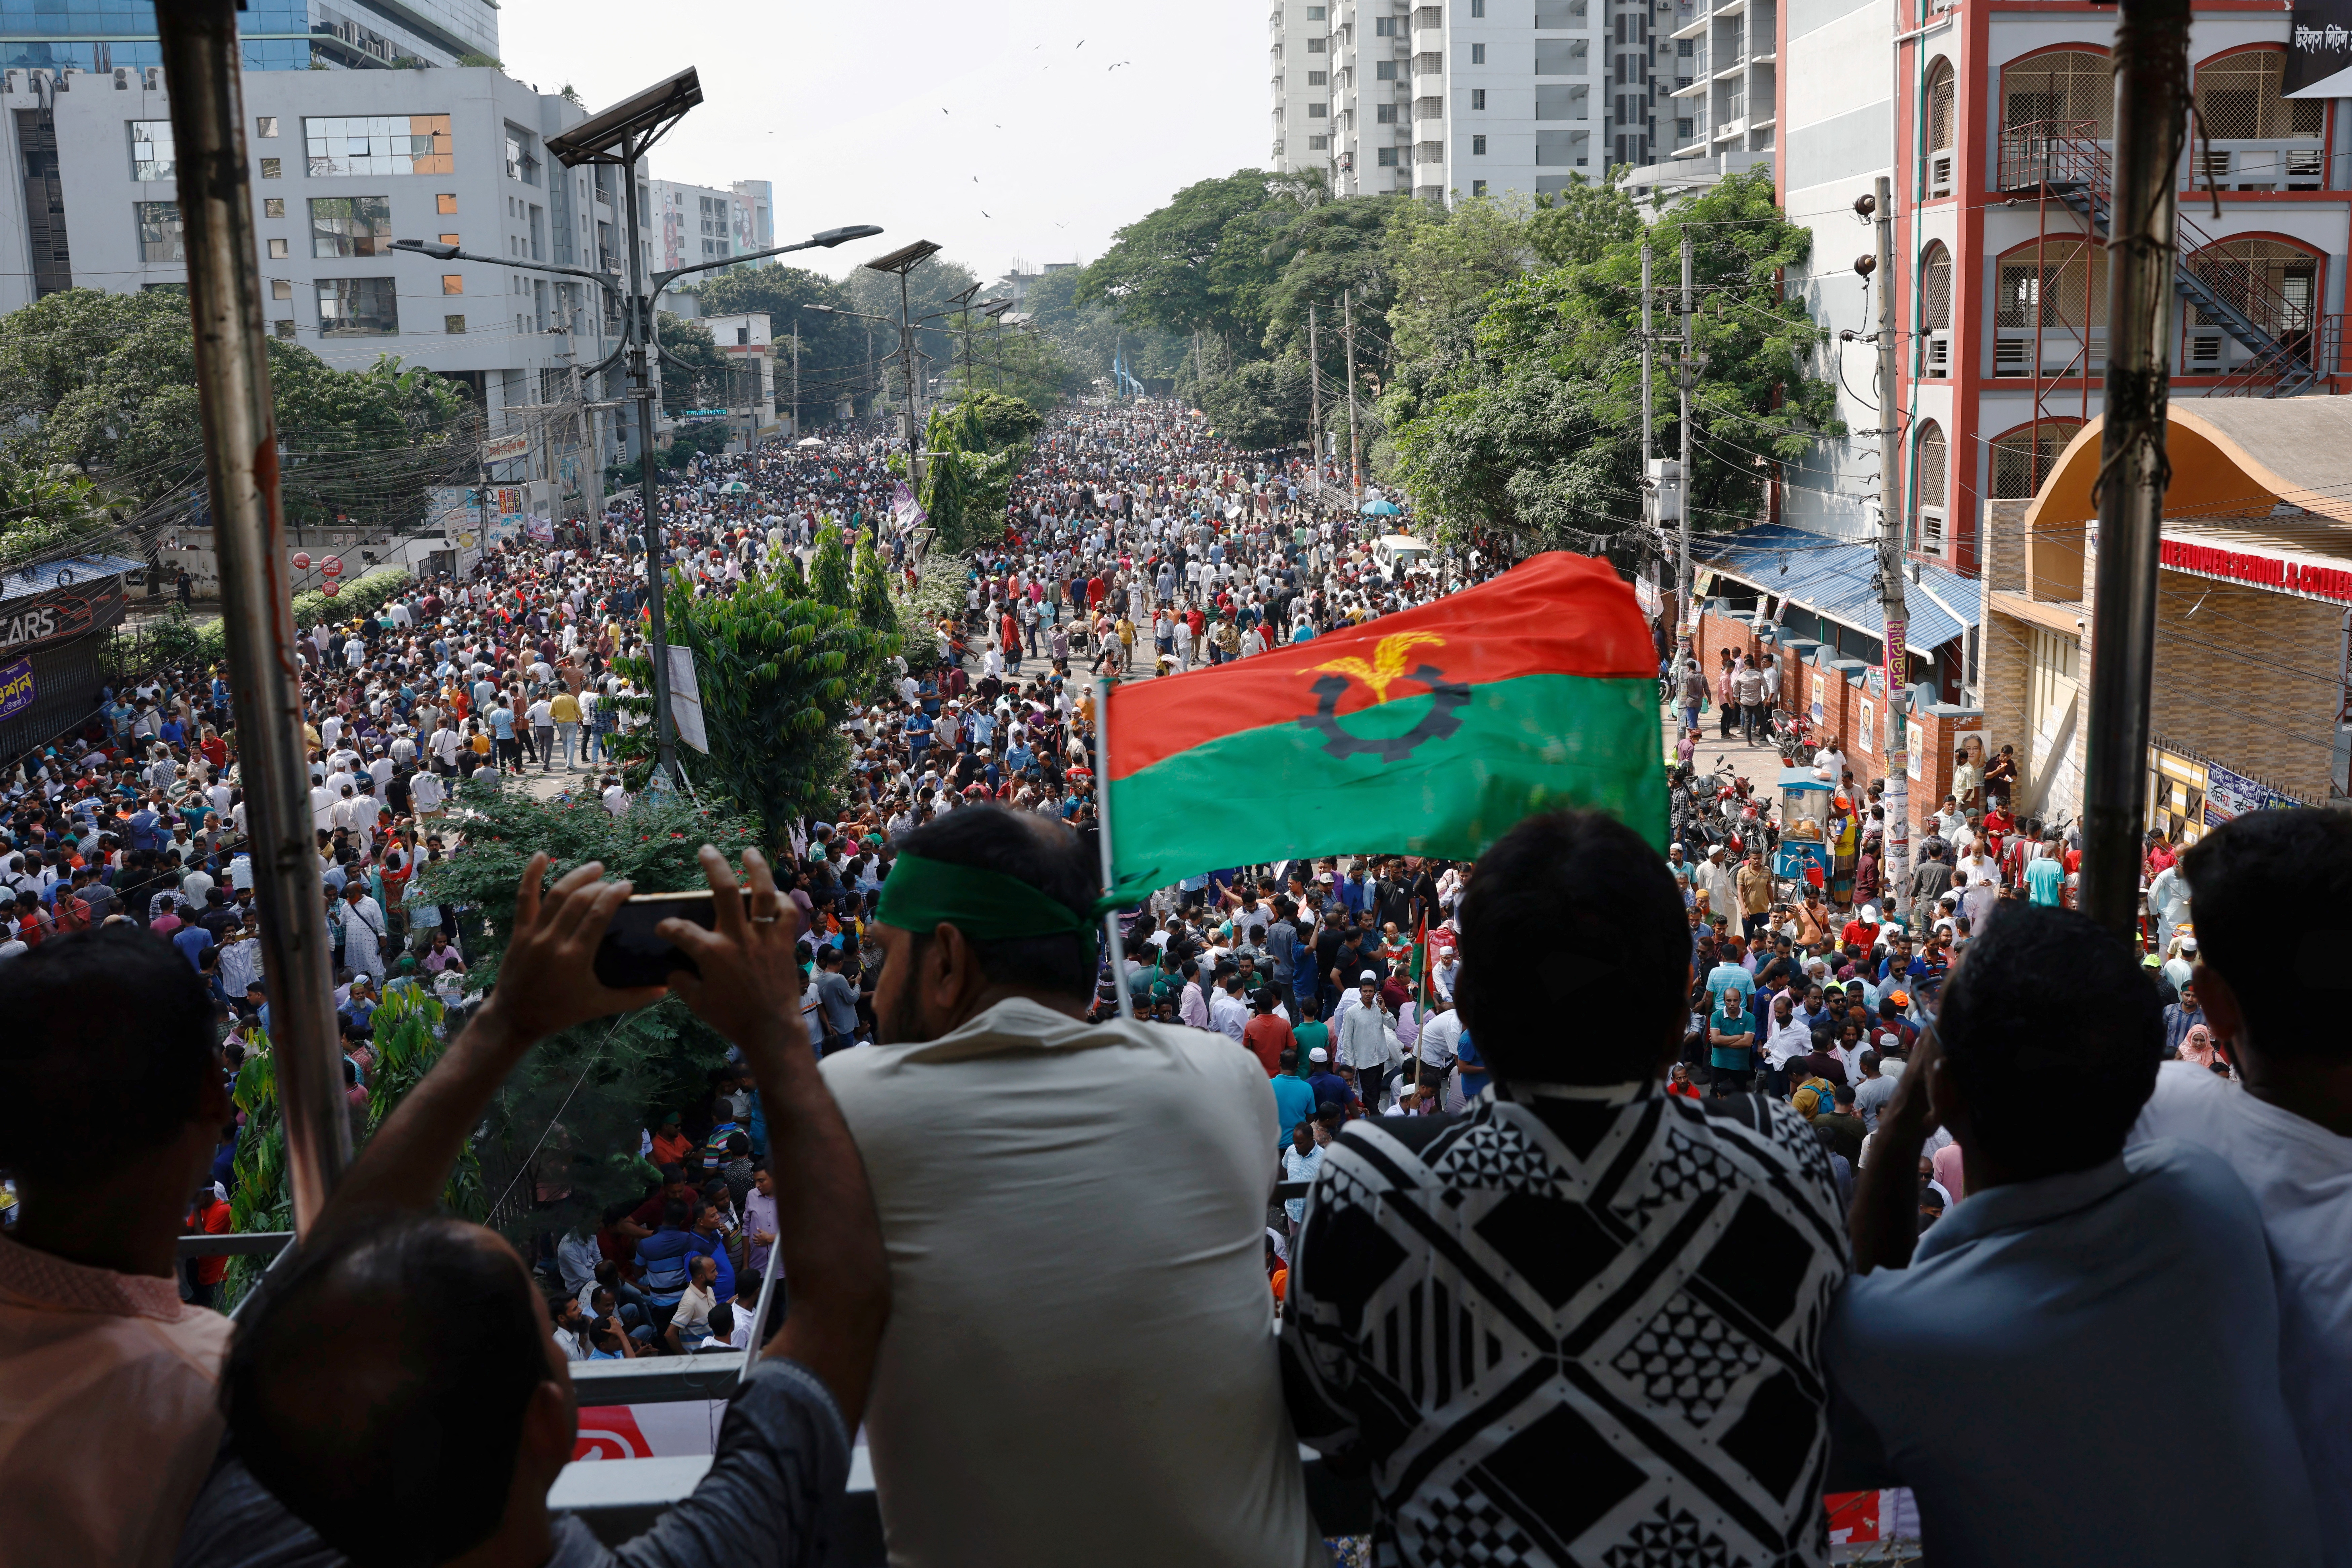 Bangladesh opposition protest turns violent amid calls for PM to